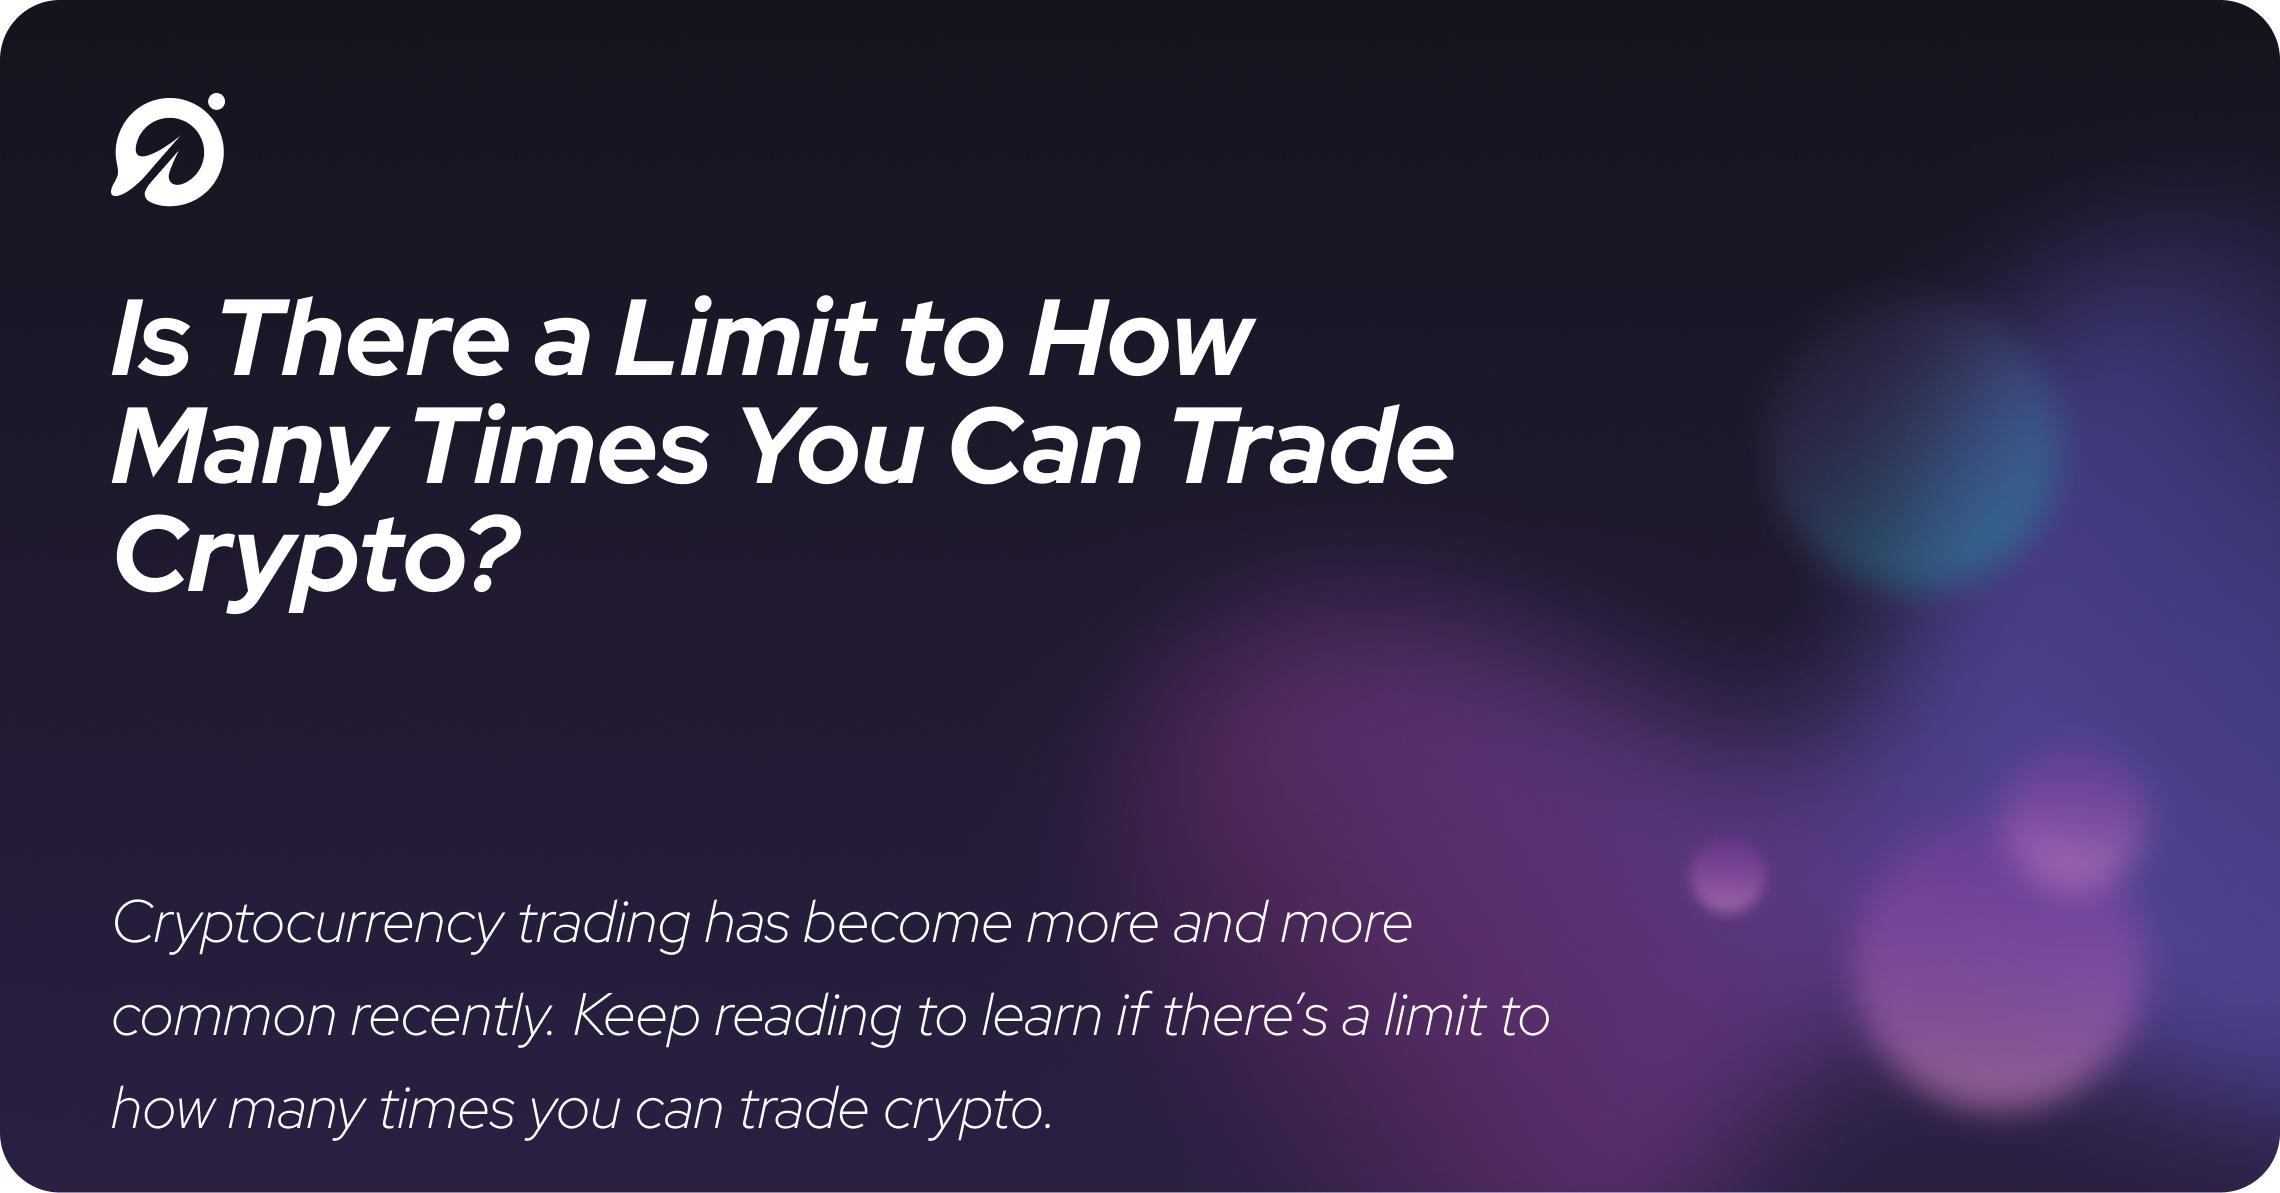 Is There a Limit to How Many Times You Can Trade Crypto?